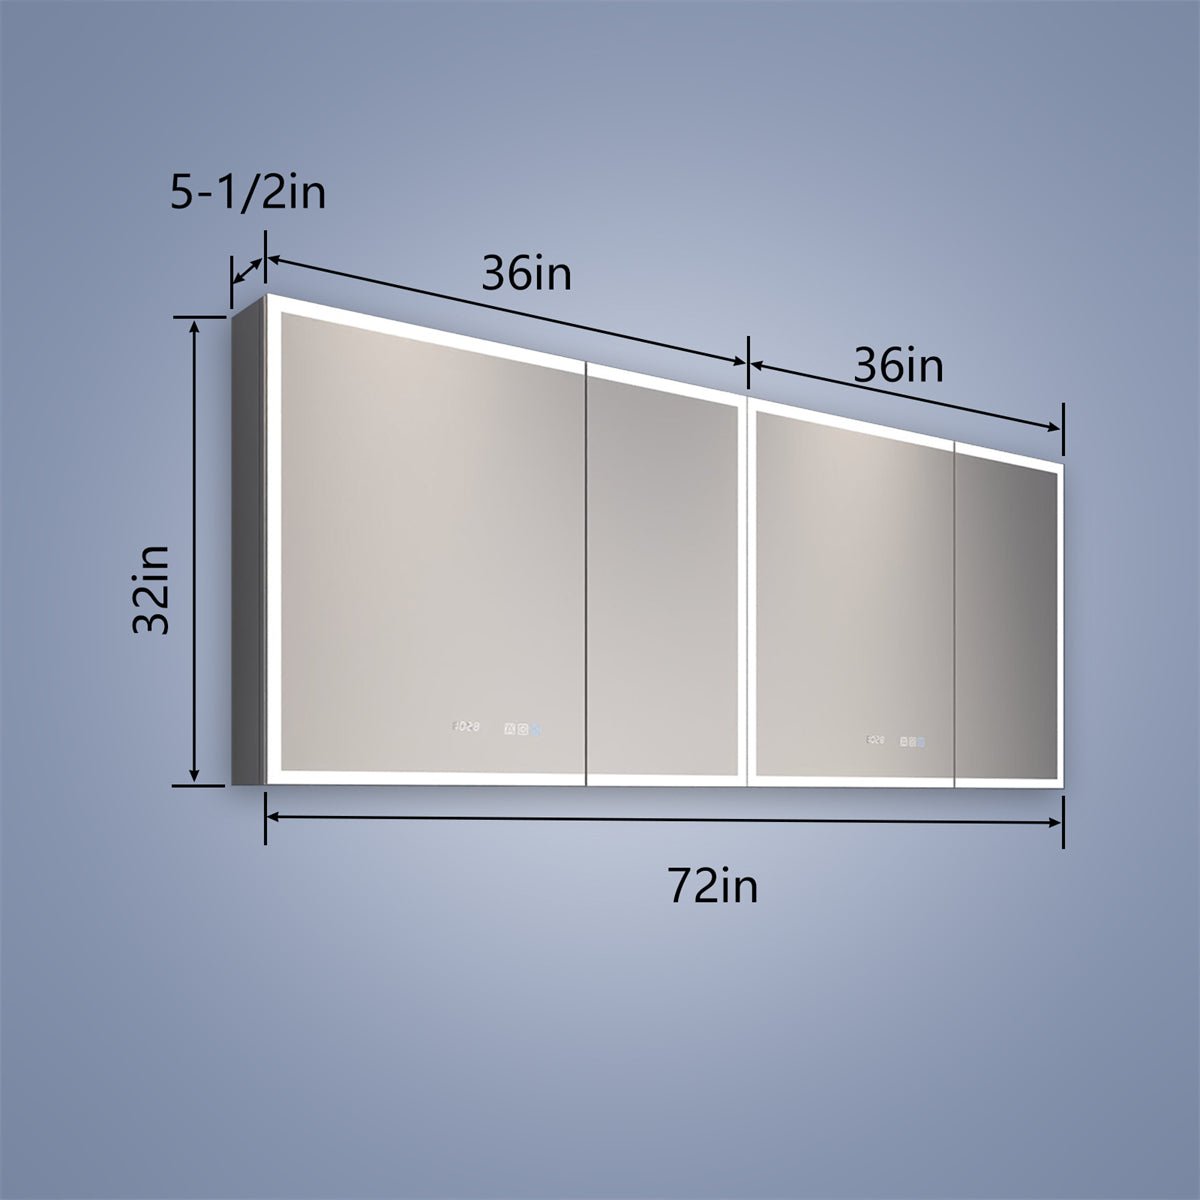 Rim 72" W x 32" H Lighted Medicine Cabinet Recessed or Surface led Medicine Cabinet with Outlets & USBs